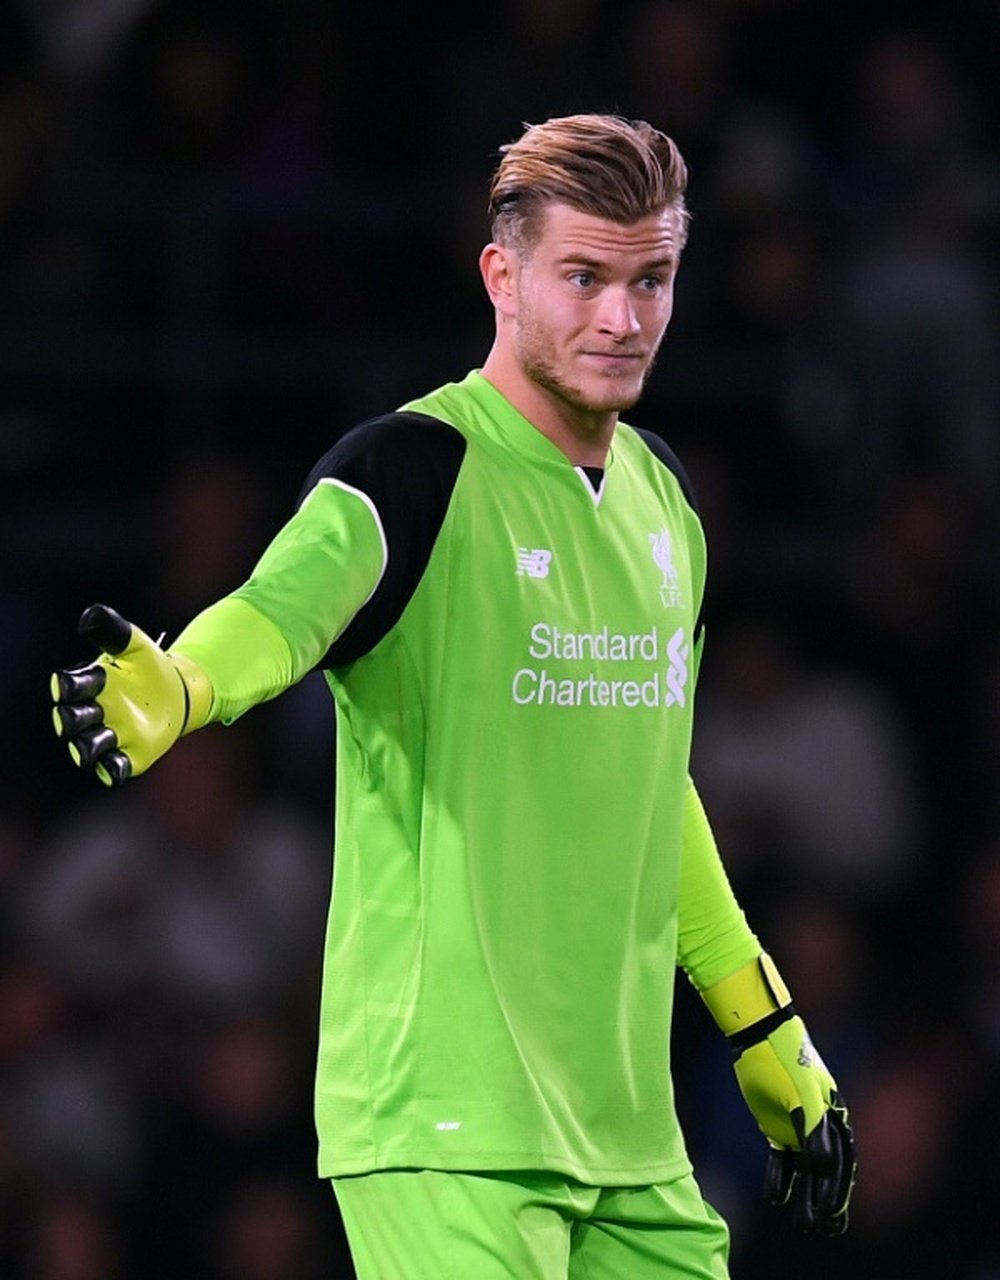 Karius takes part in a match for Liverpool. AFP